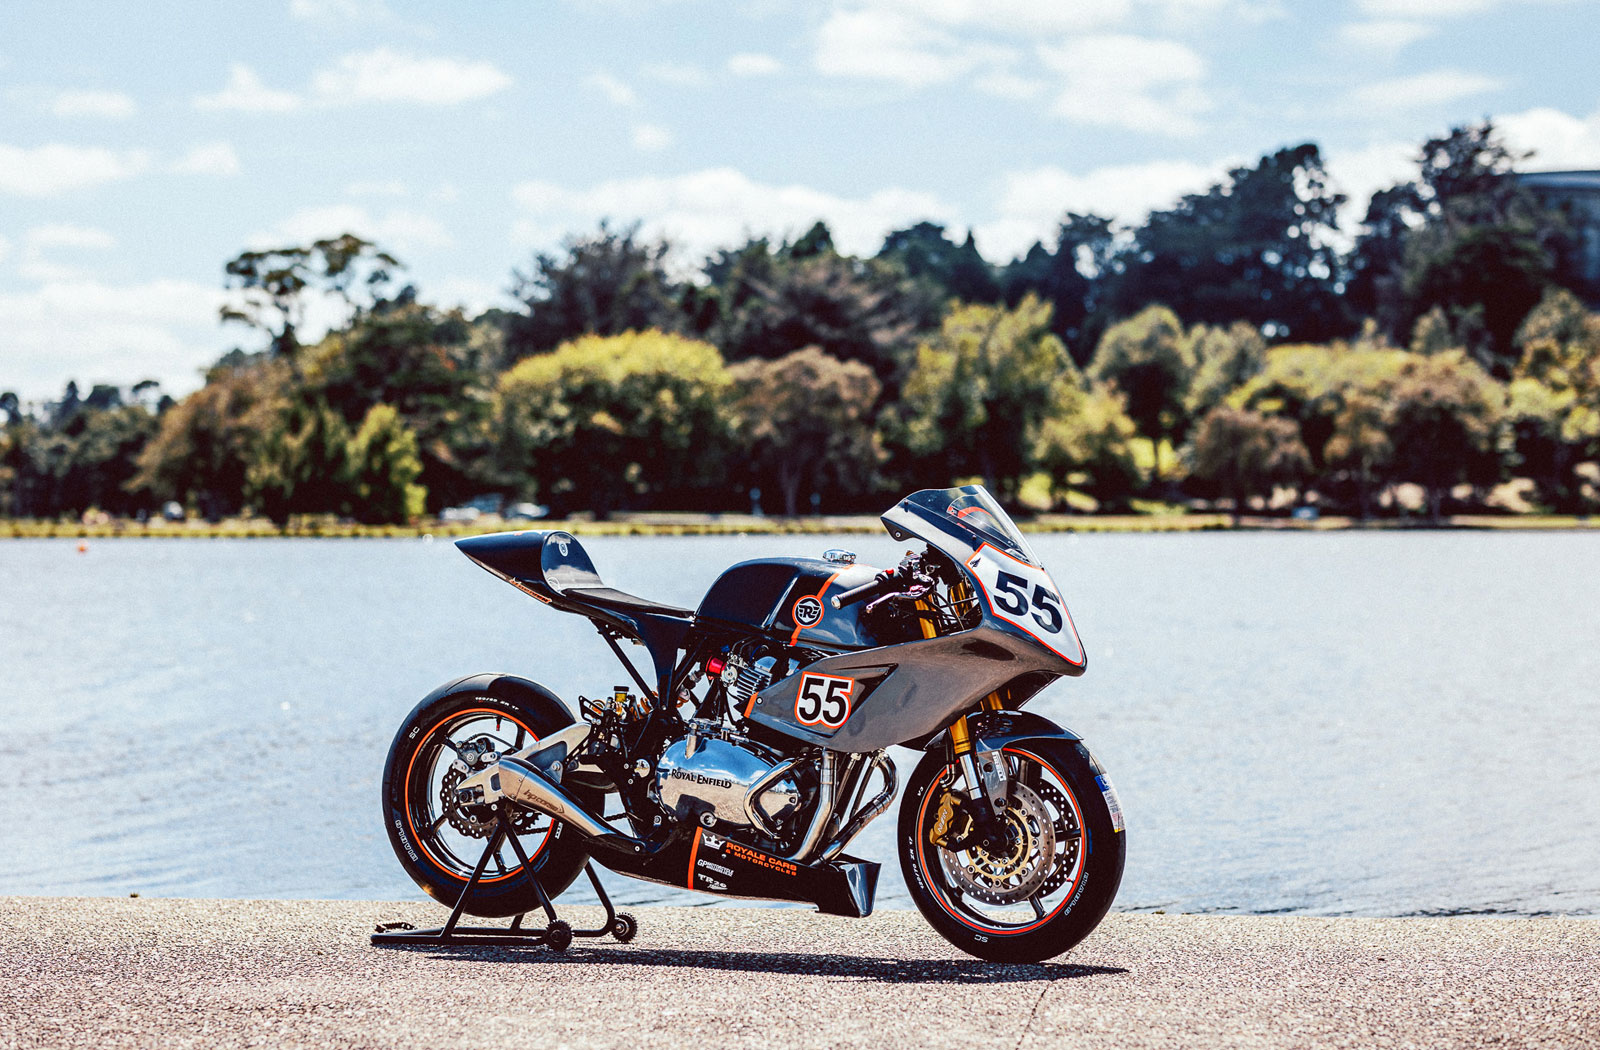 Royale Motorcycles 55 GT production racer